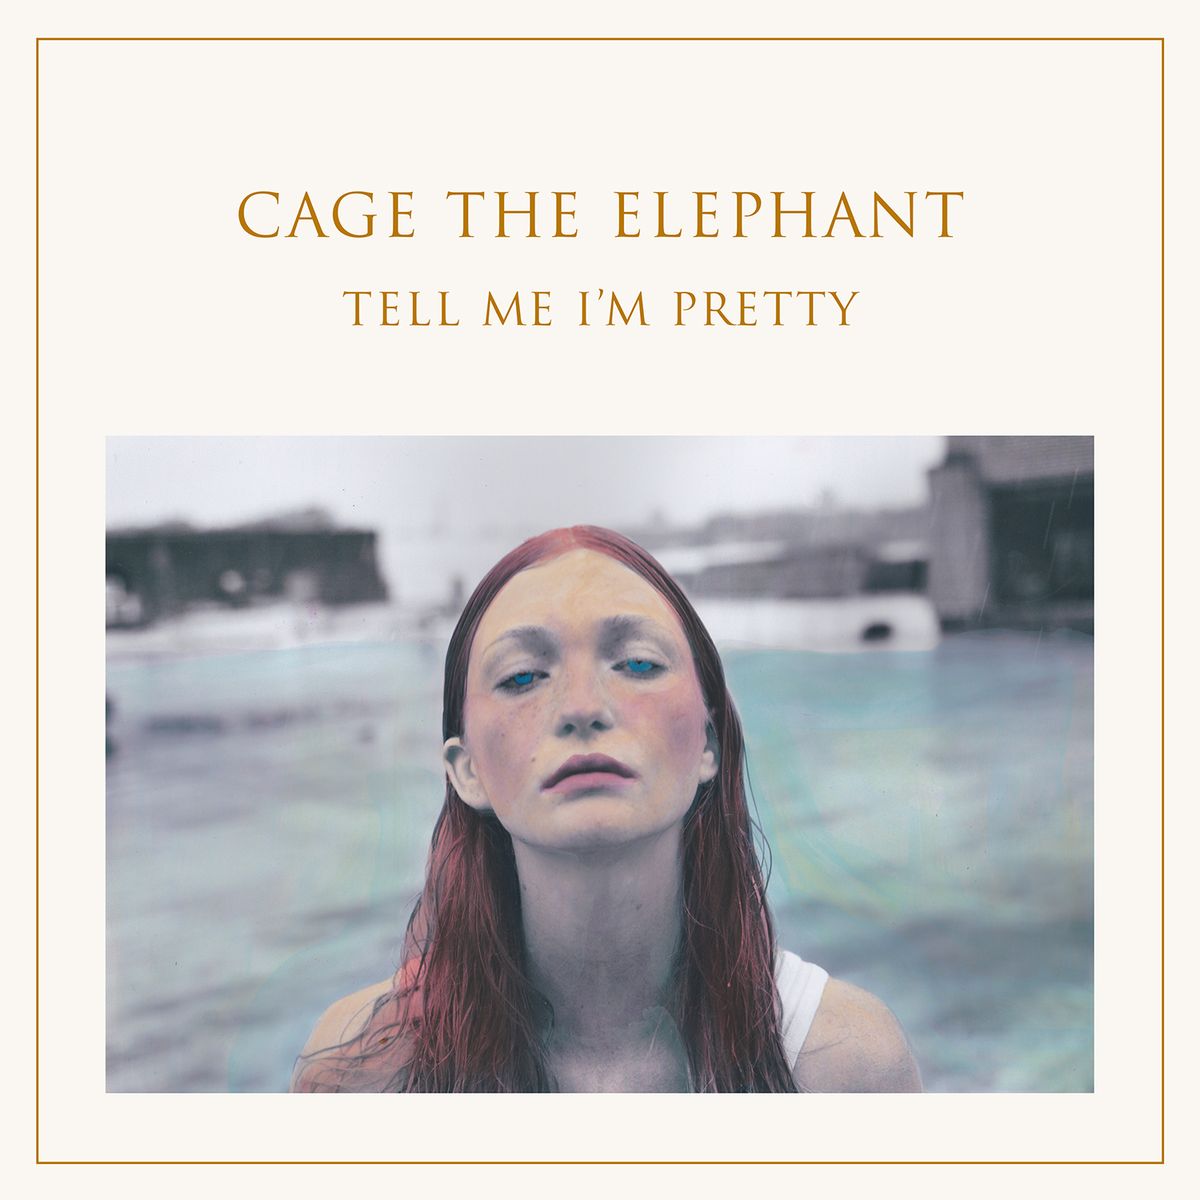 Cage the Elephant’s “Tell Me I’m Pretty” Introduces a New, Tranquil Sound